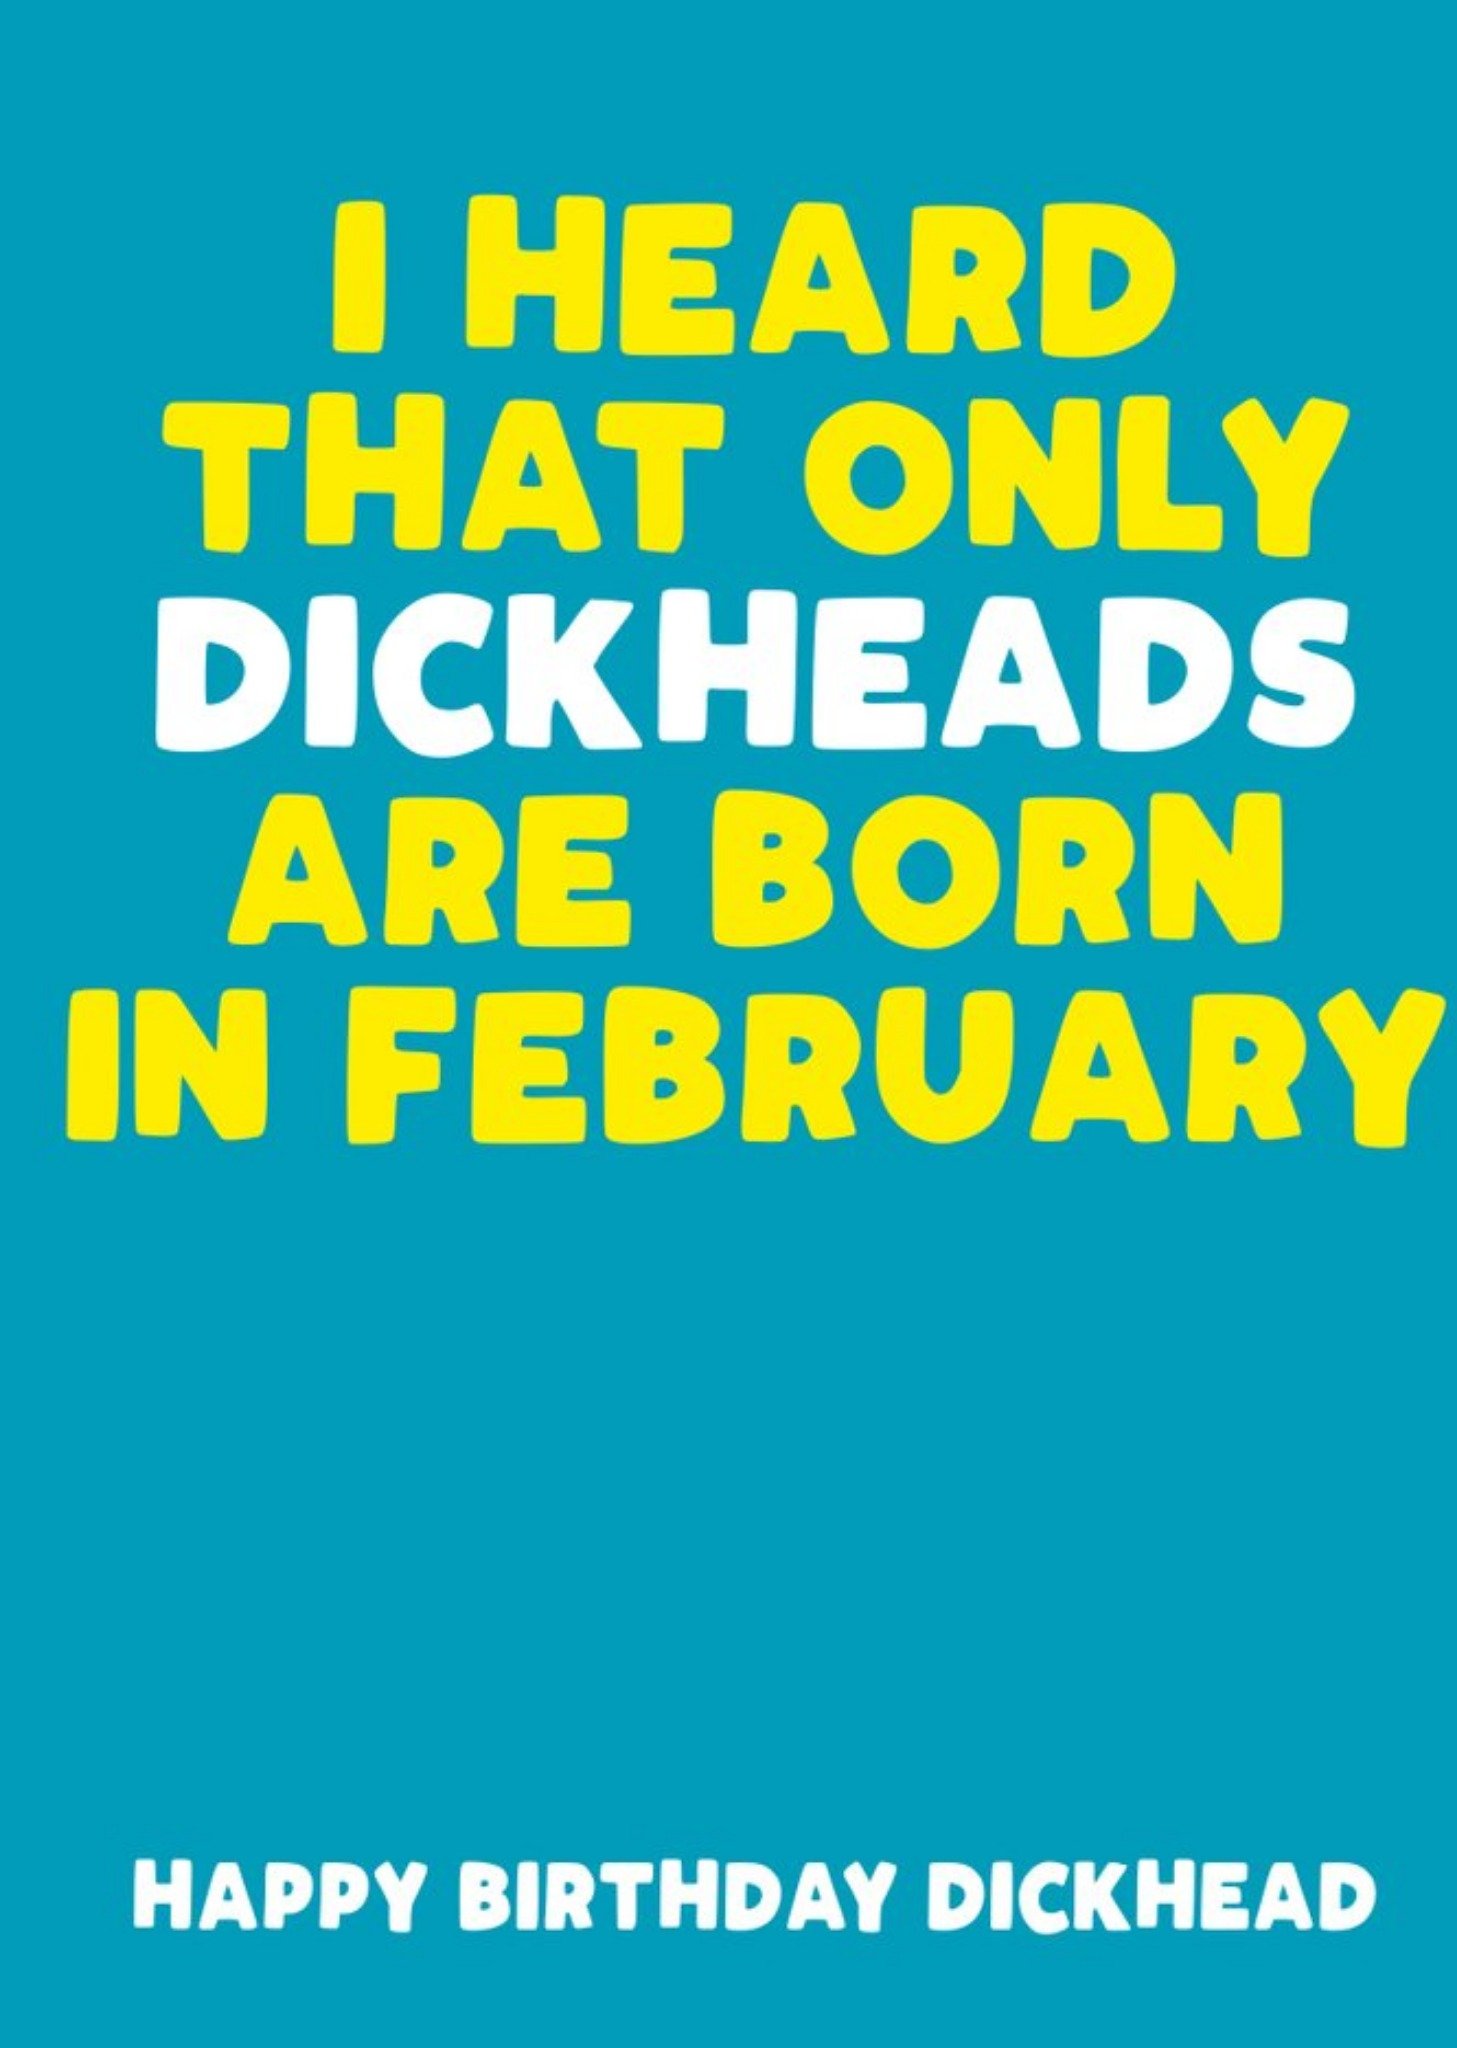 Moonpig I Heard That Only Dickheads Are Born In February Funny Card Ecard